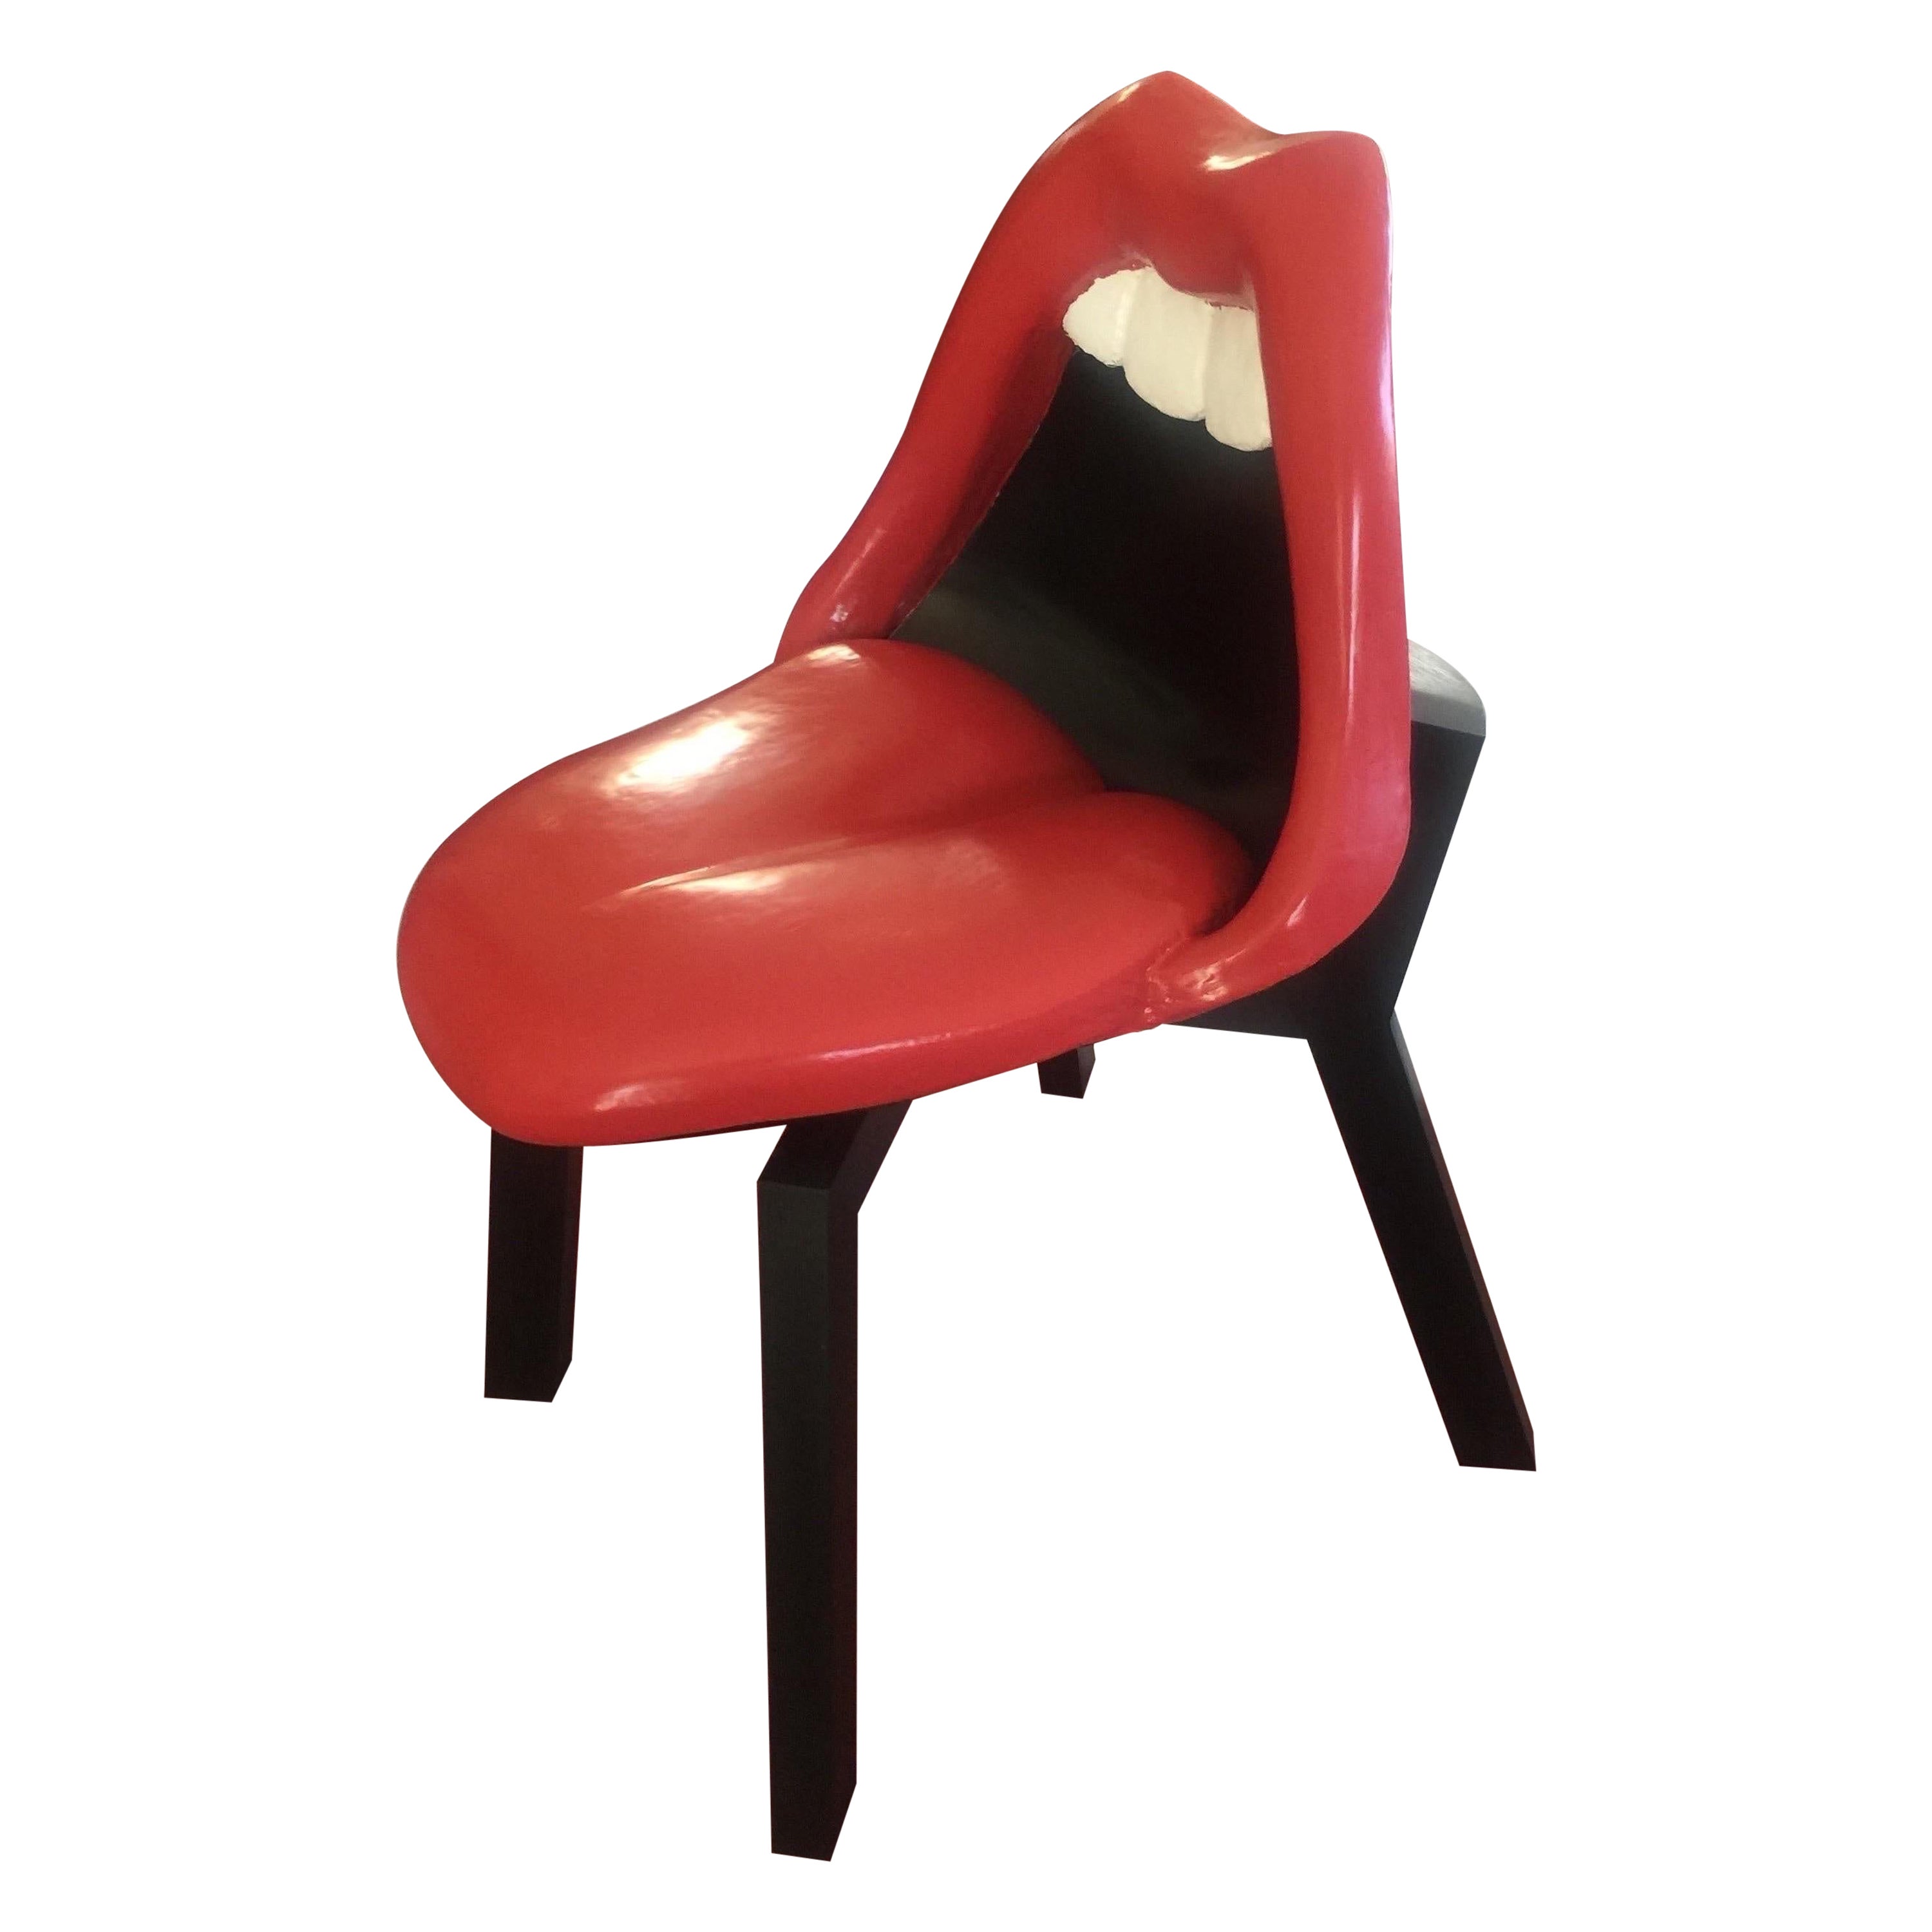 Le fauteuil Tongue and lip chair, Danemark 2021